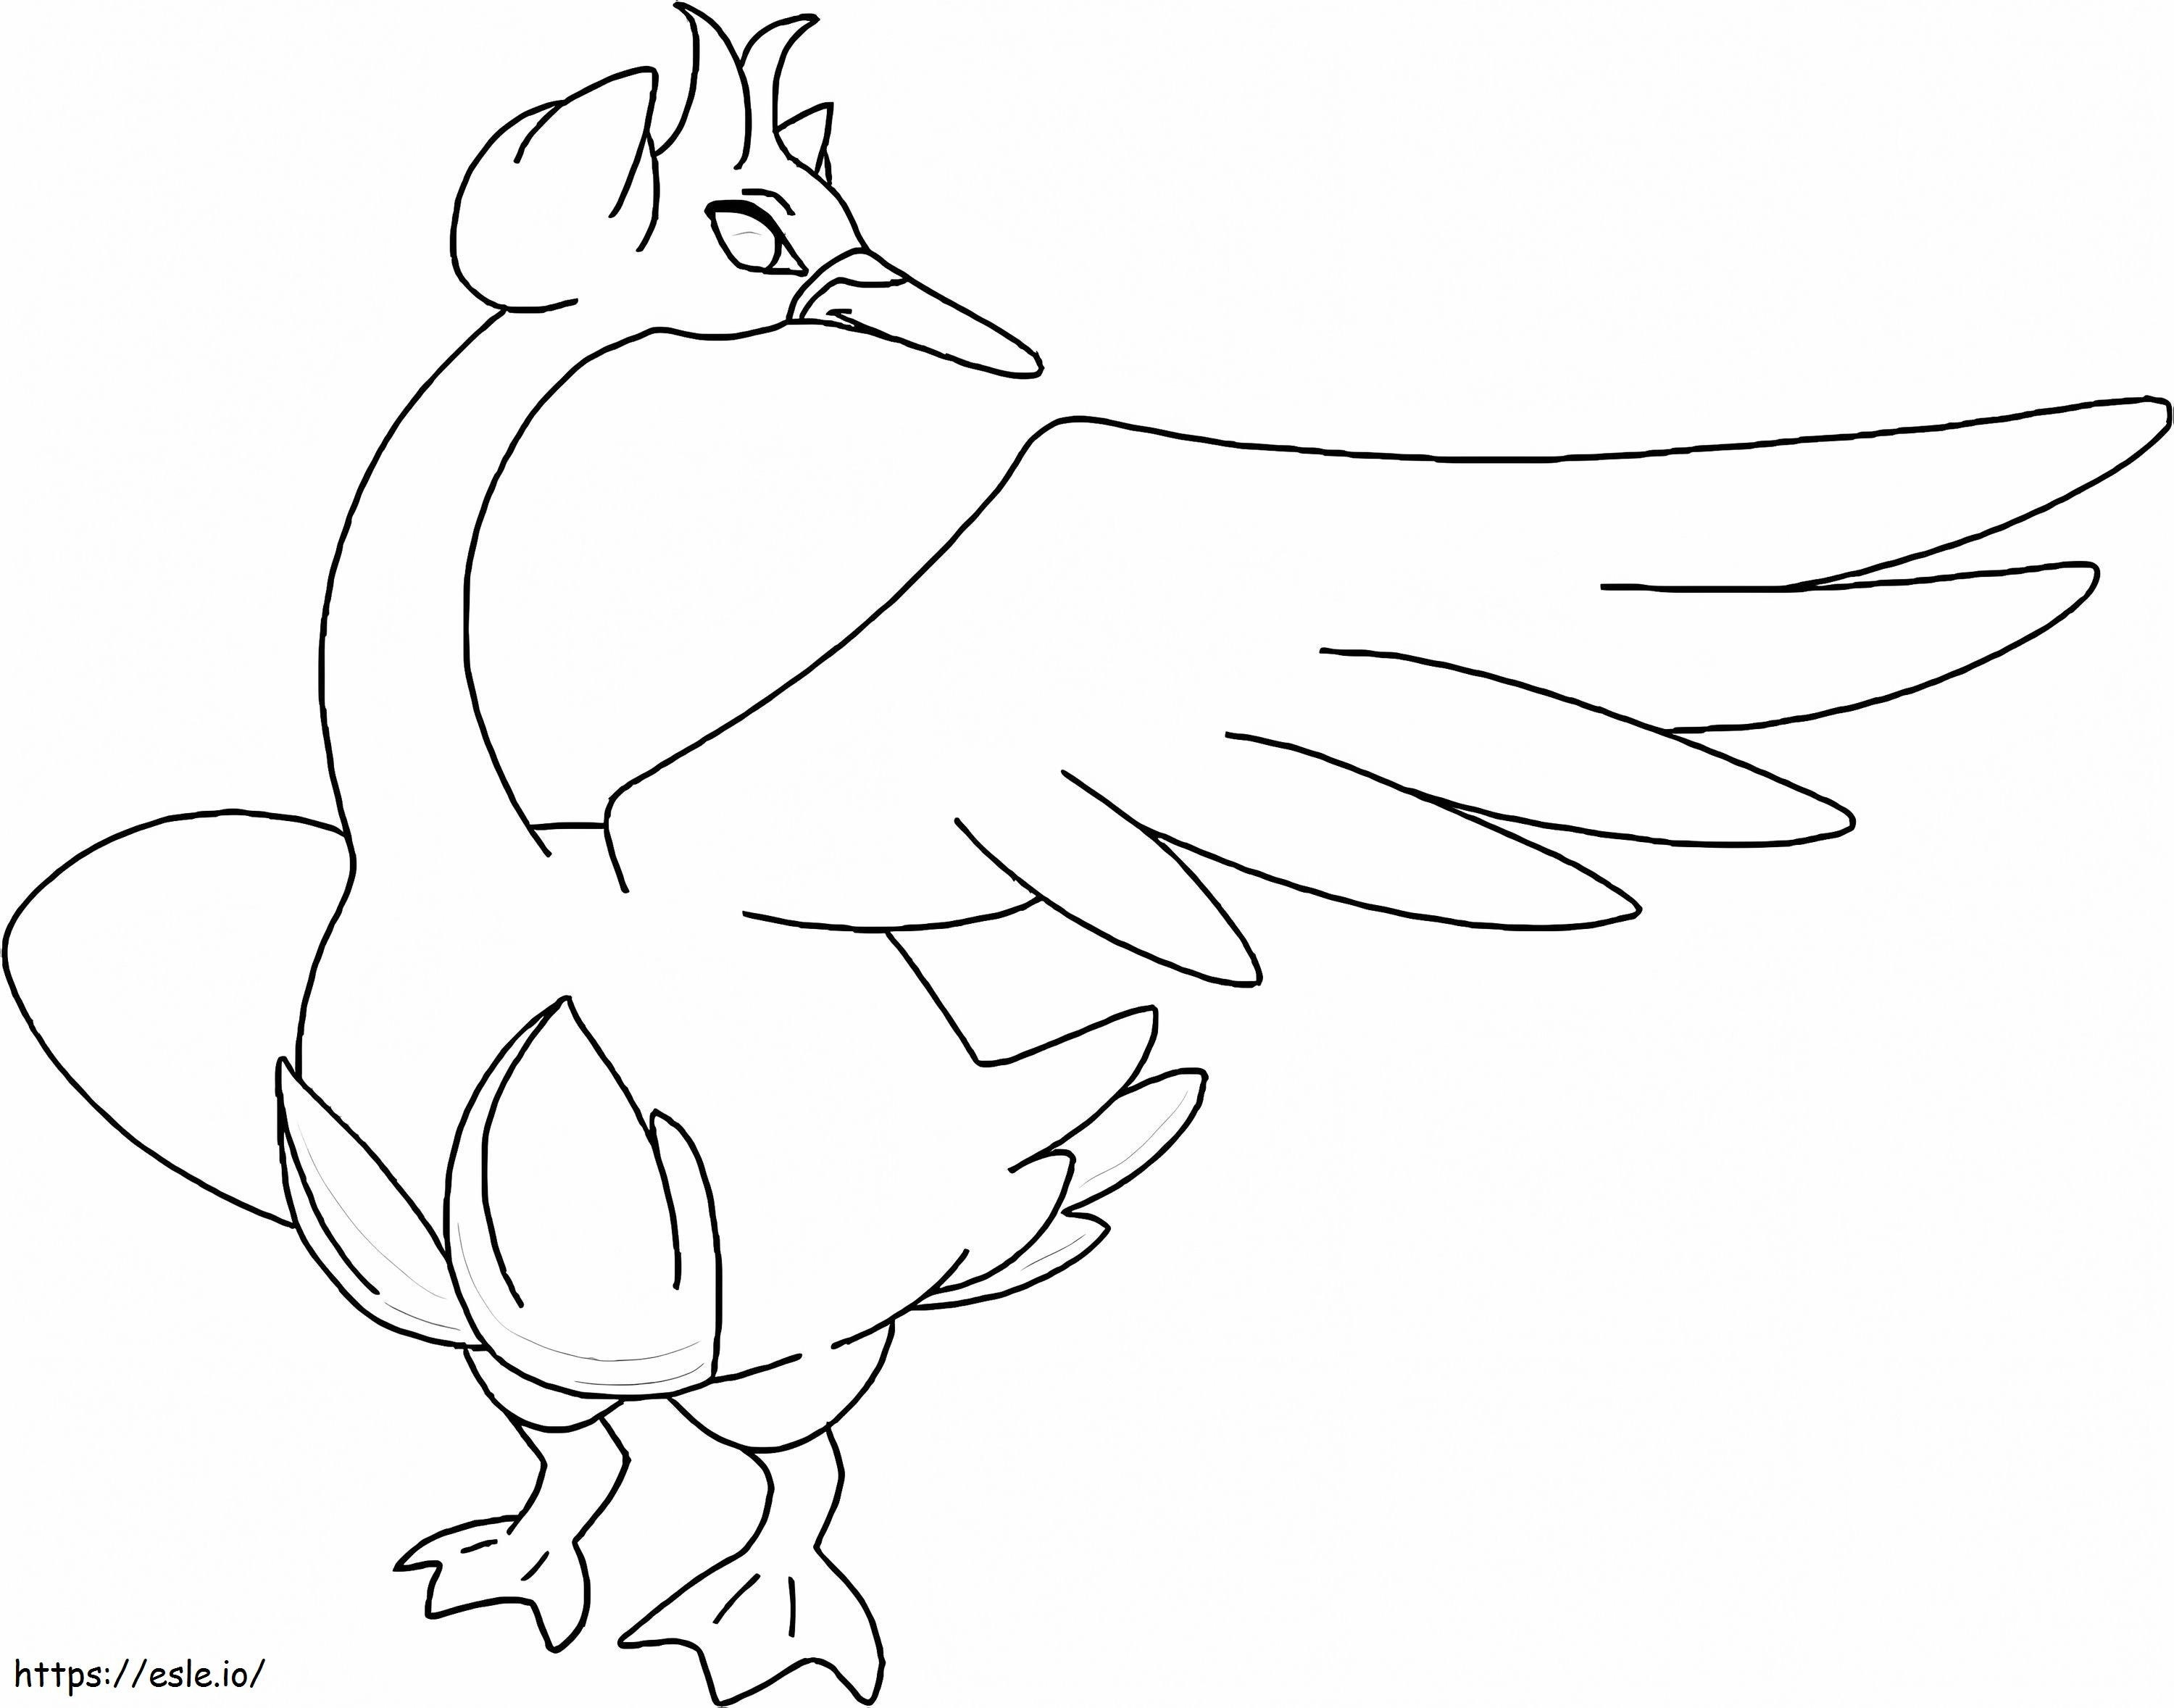 Swanna 3 coloring page